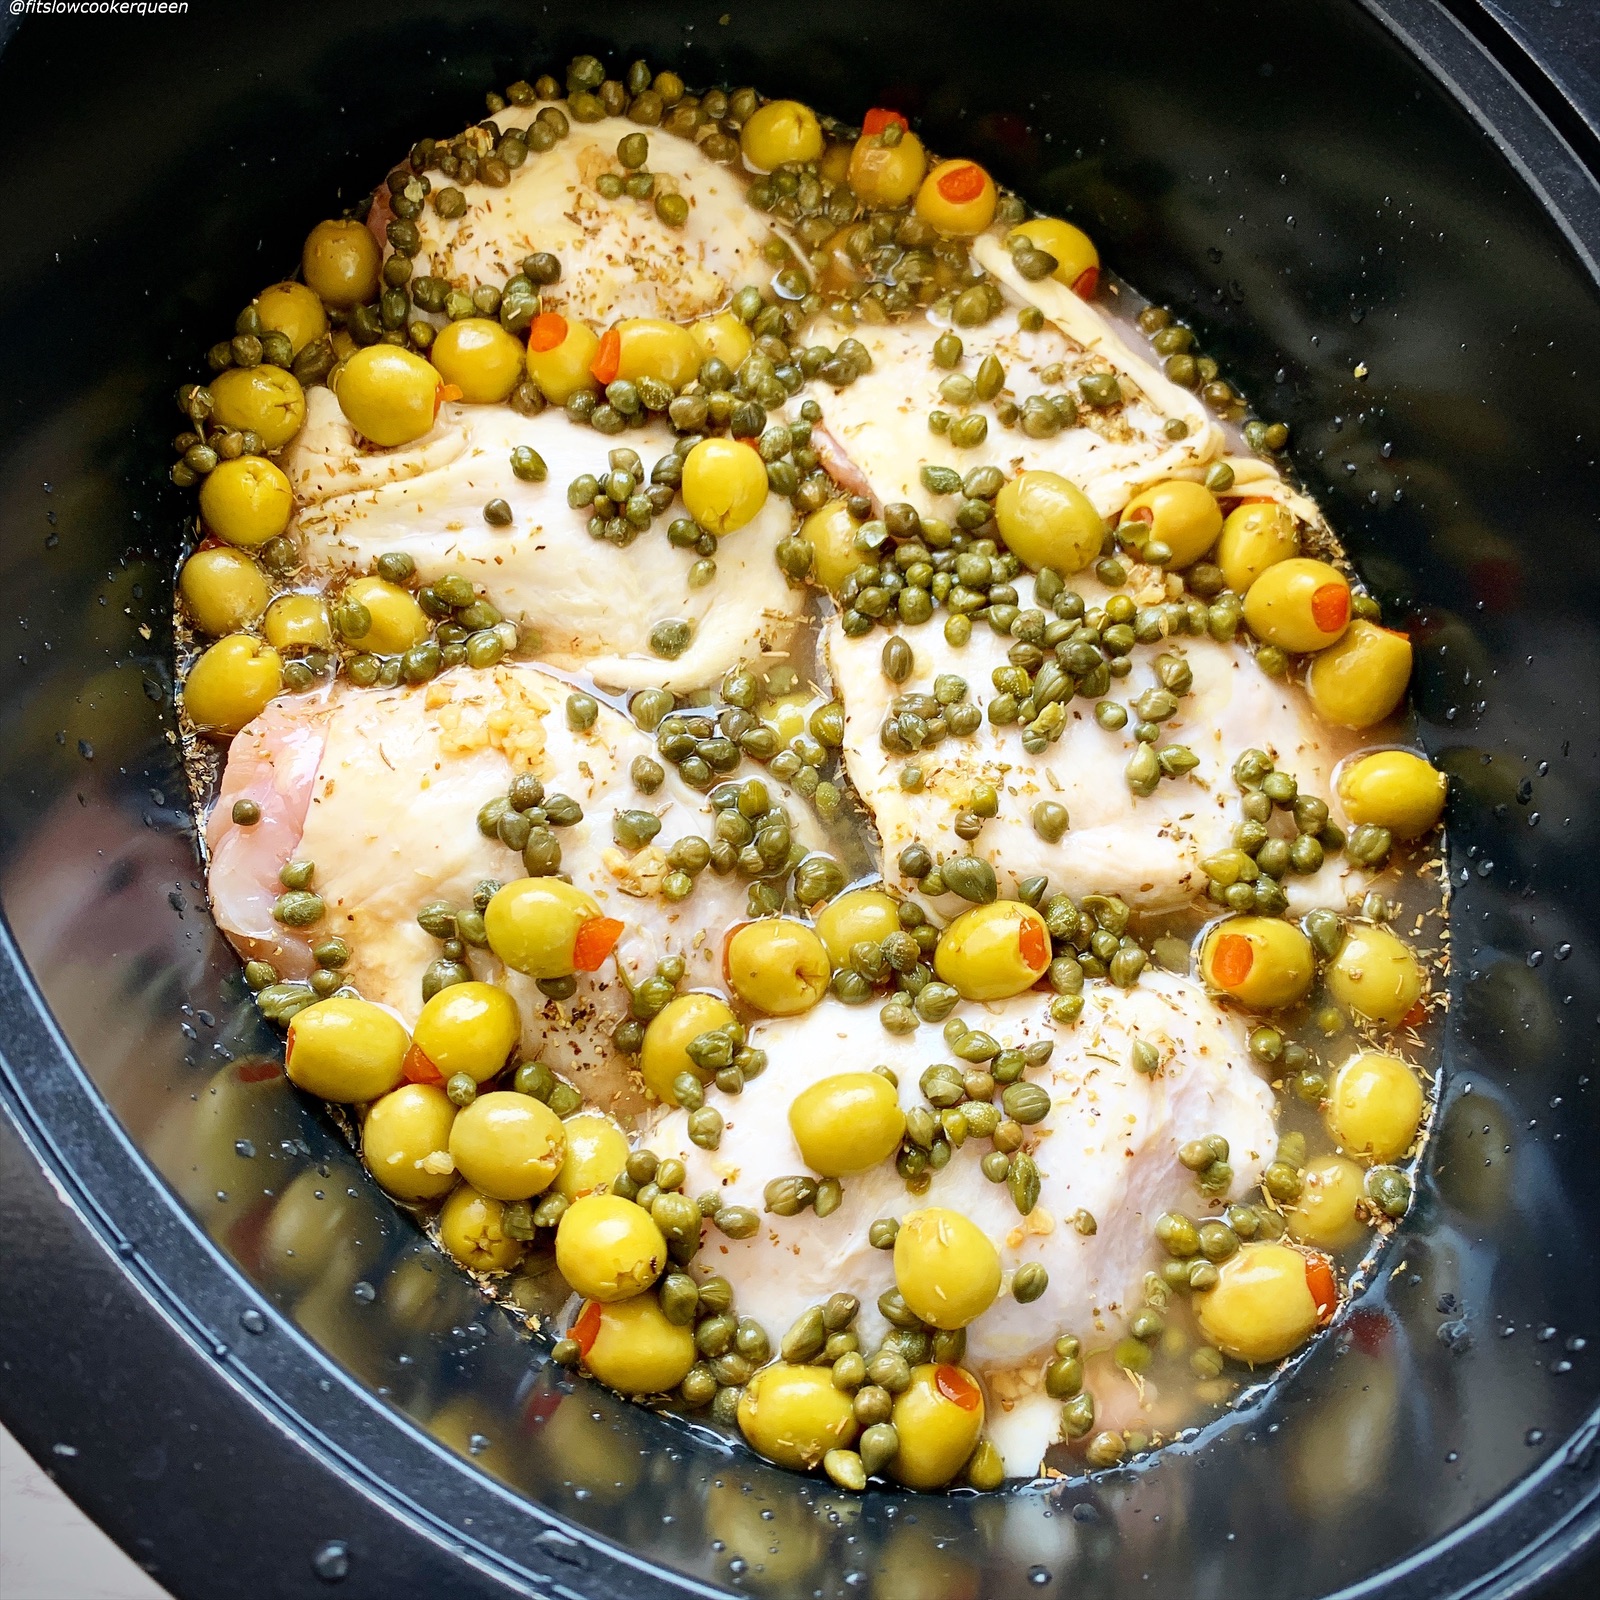 before pic of raw food in the slow cooker for Slow Cooker Instant Pot Chicken, Olives & Capers (Low-Carb, Paleo, Whole30) 